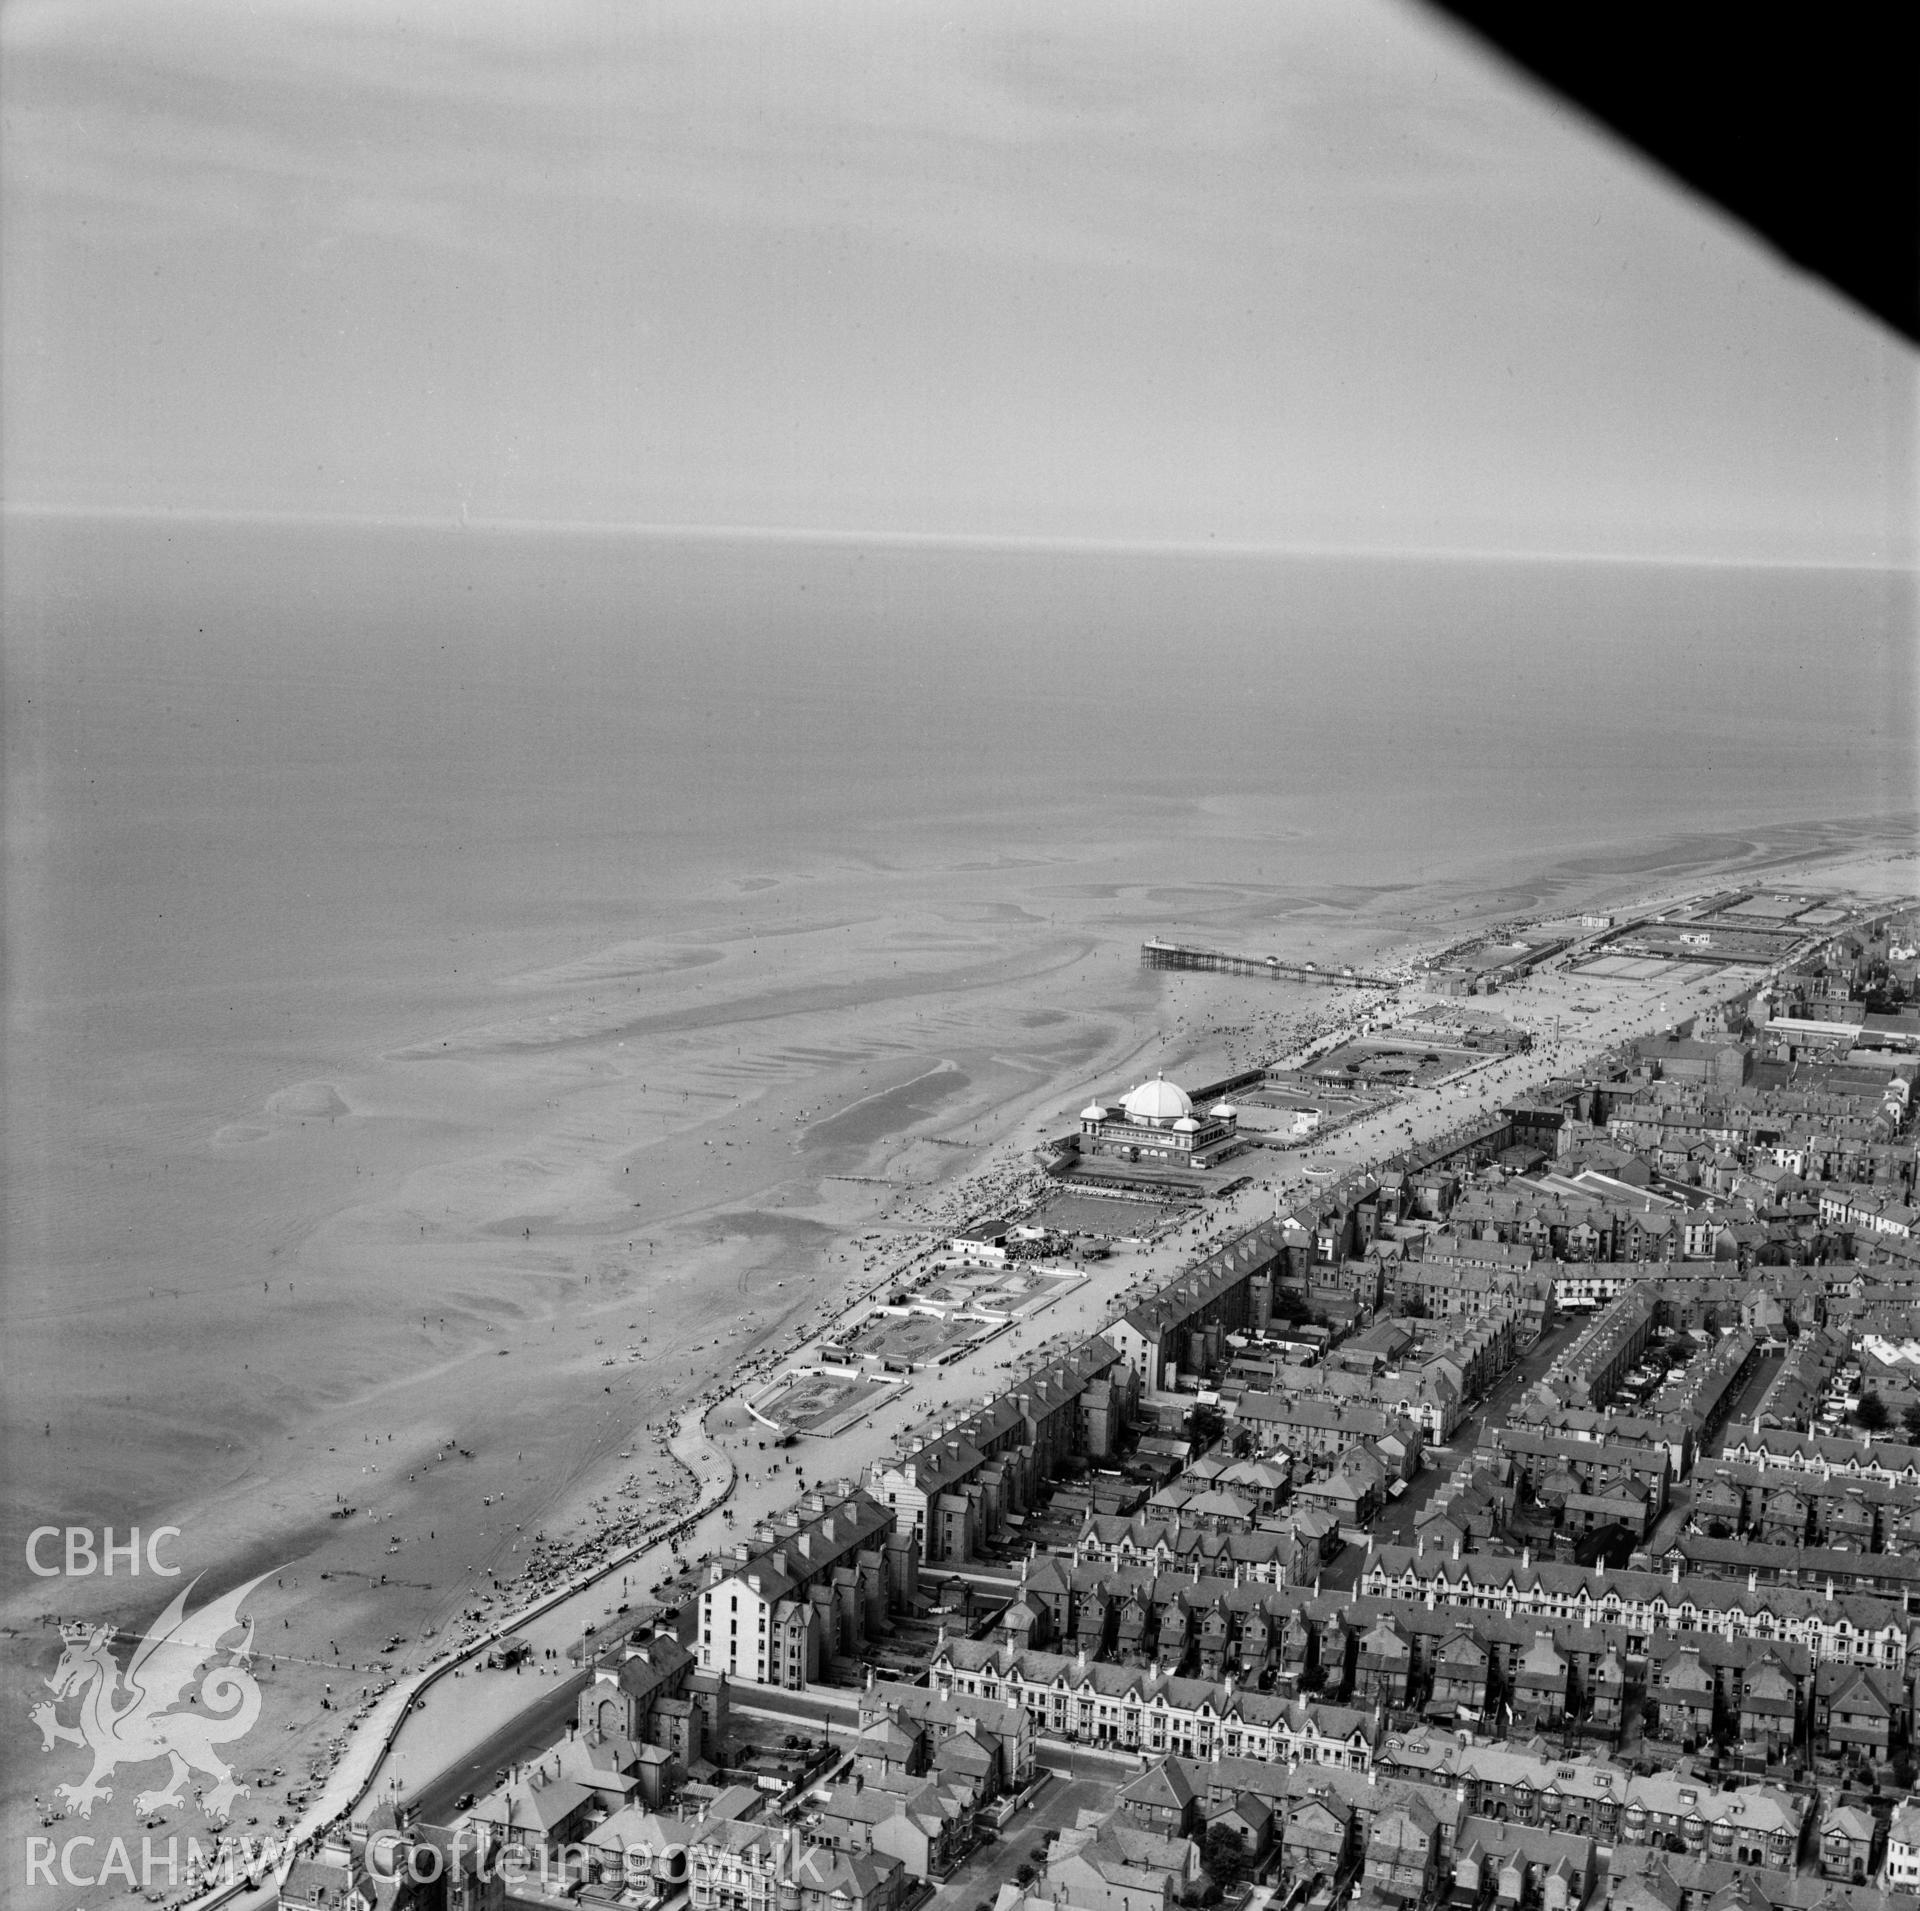 Distant view of Rhyl